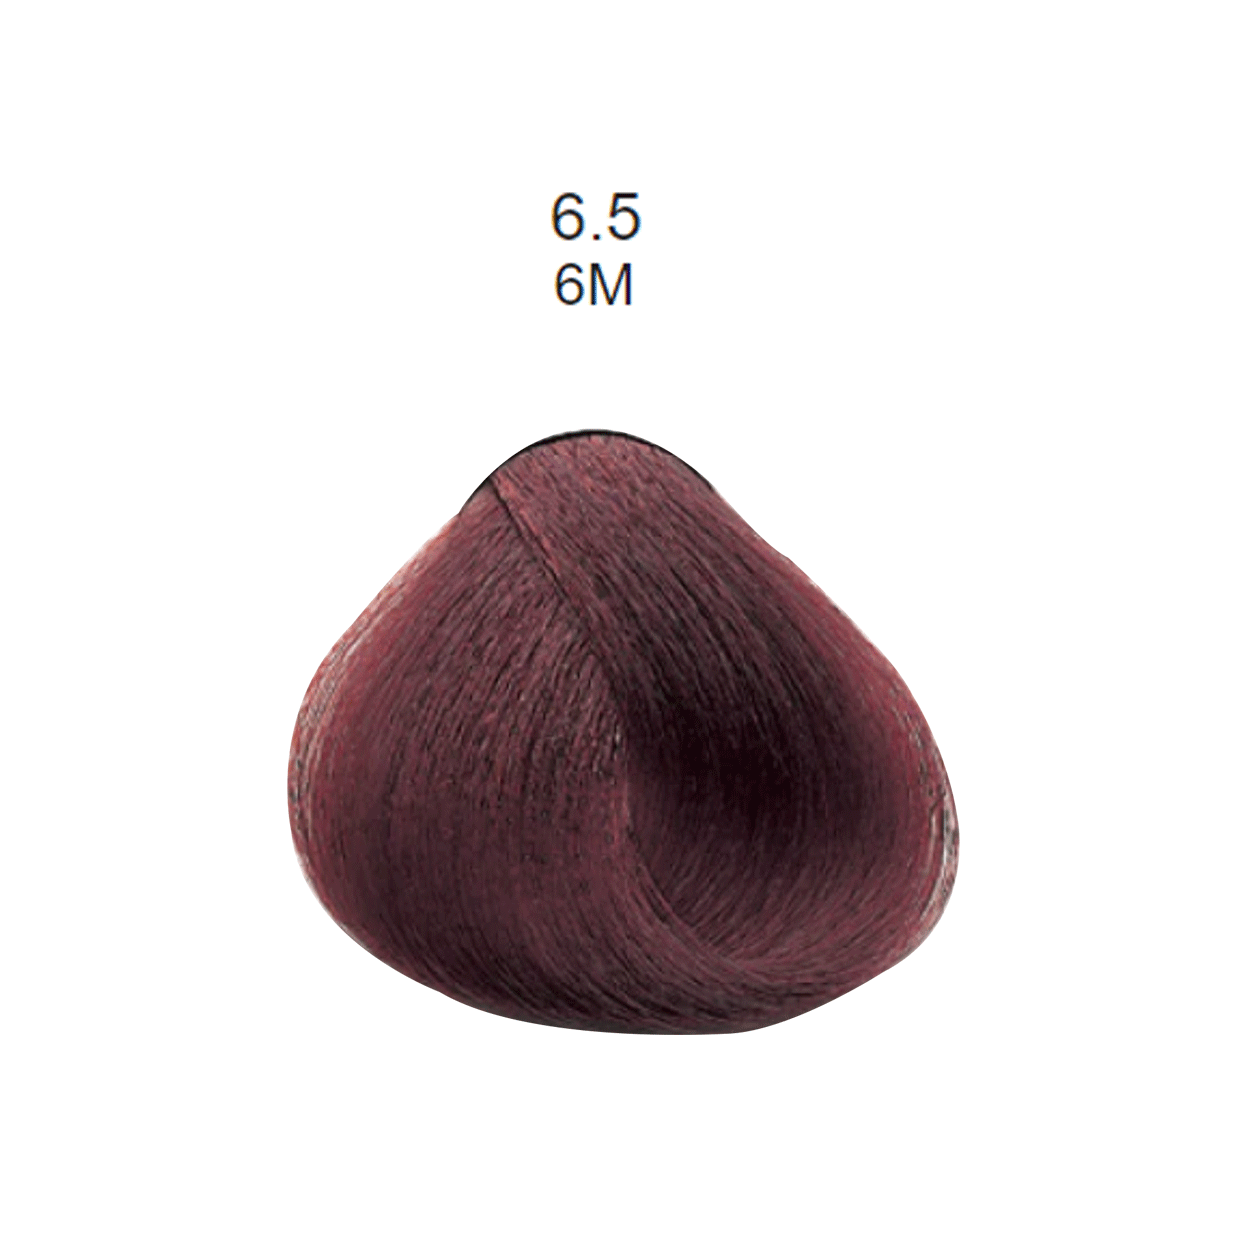 Virtuous Color - Permanent Coloring System 6.5 (Mahogany - 6M)